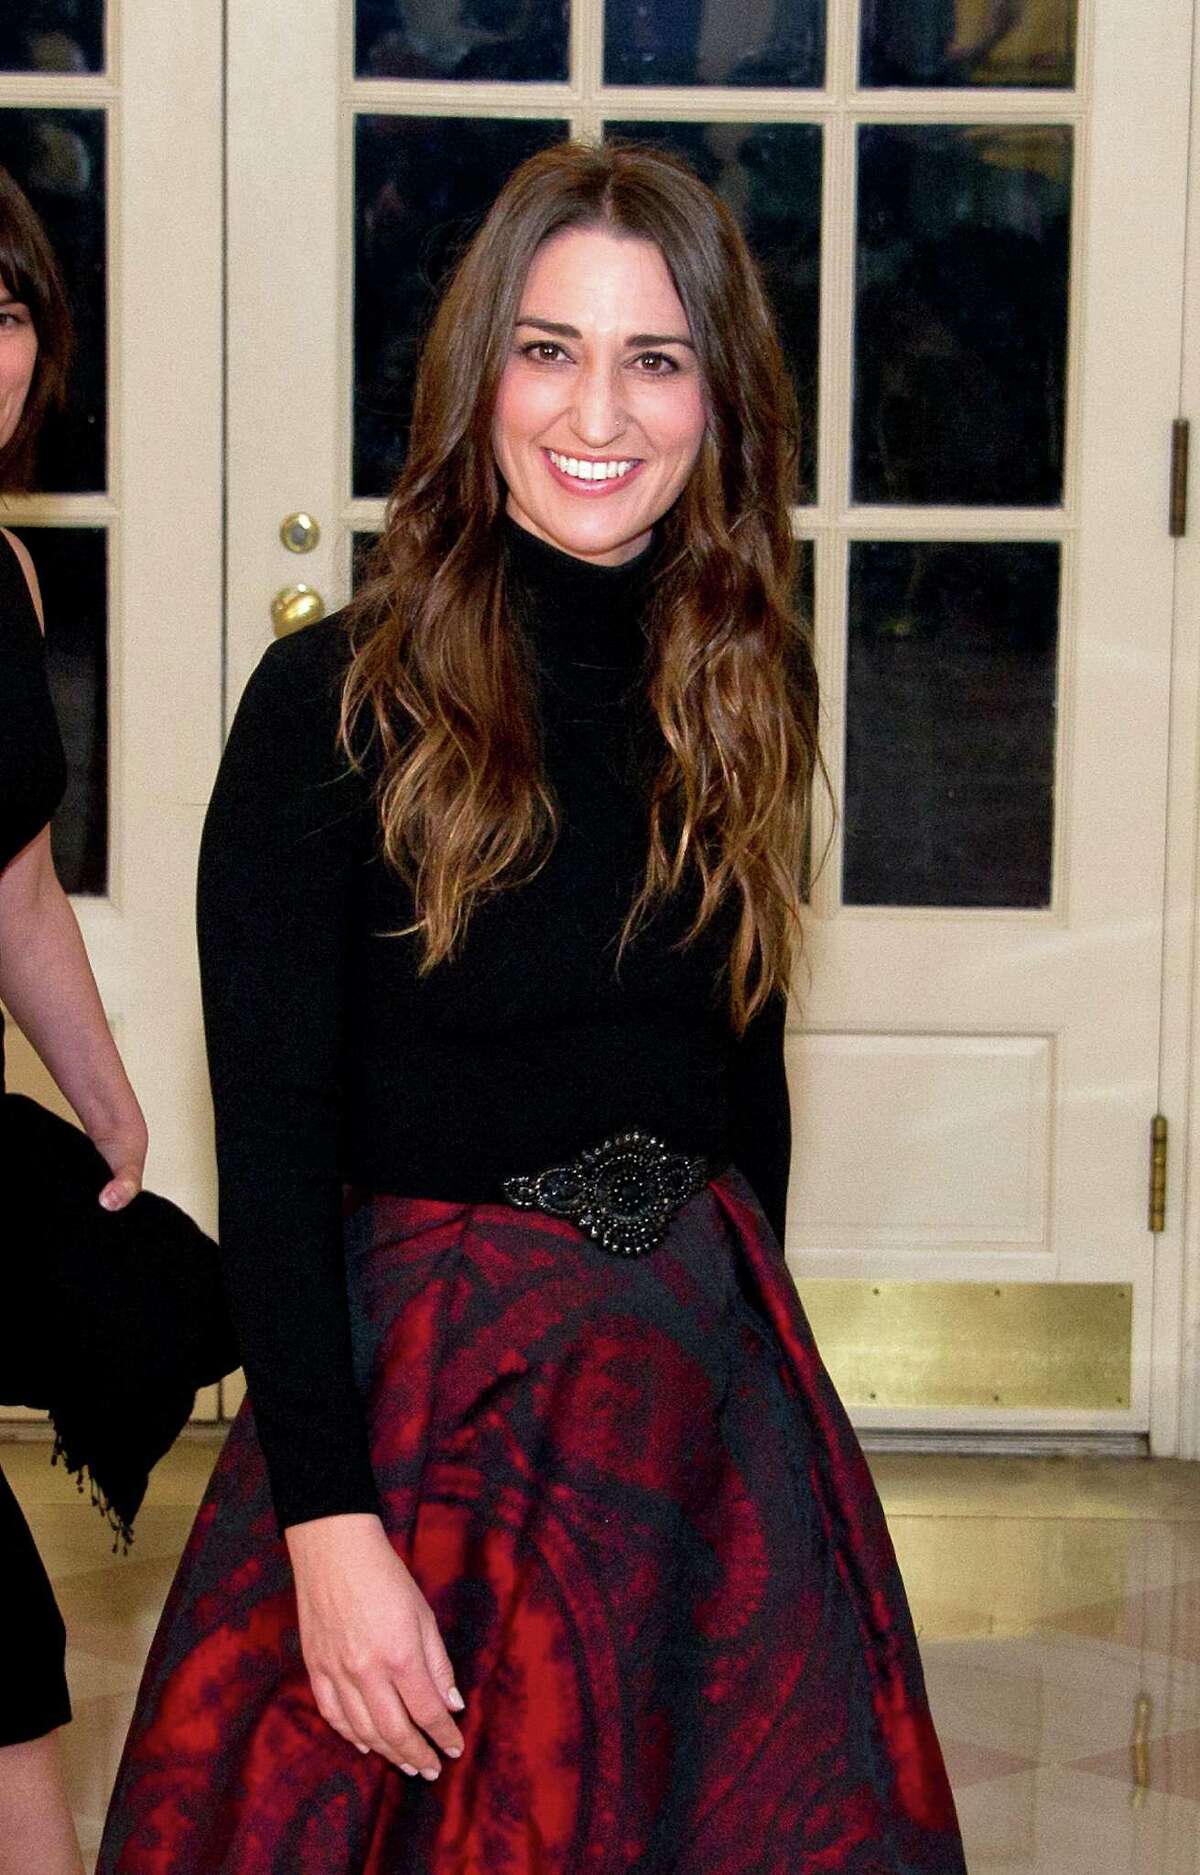 WASHINGTON, DC - MARCH 10: Singer Sara Bareilles arrives for the State Dinner at the White House March 10, 2016 in Washington, DC. Hosted by President and First Lady Obama, the dinner is in honor of Prime Minister Justin Trudeau and Sophie Gregoire Trudeau of Canada.